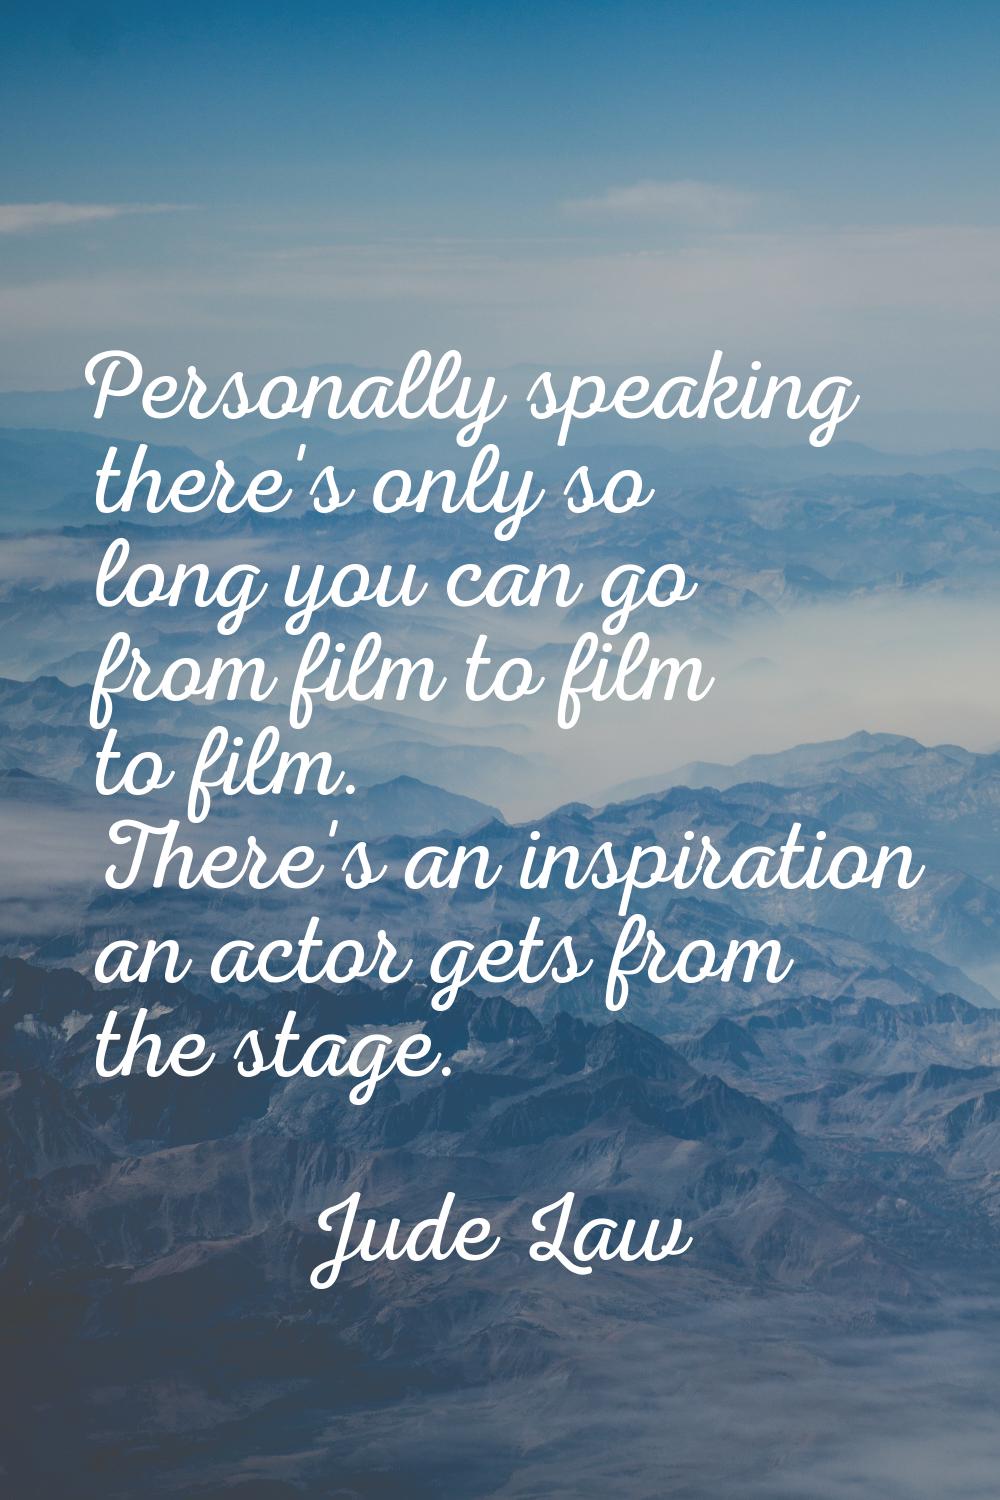 Personally speaking there's only so long you can go from film to film to film. There's an inspirati